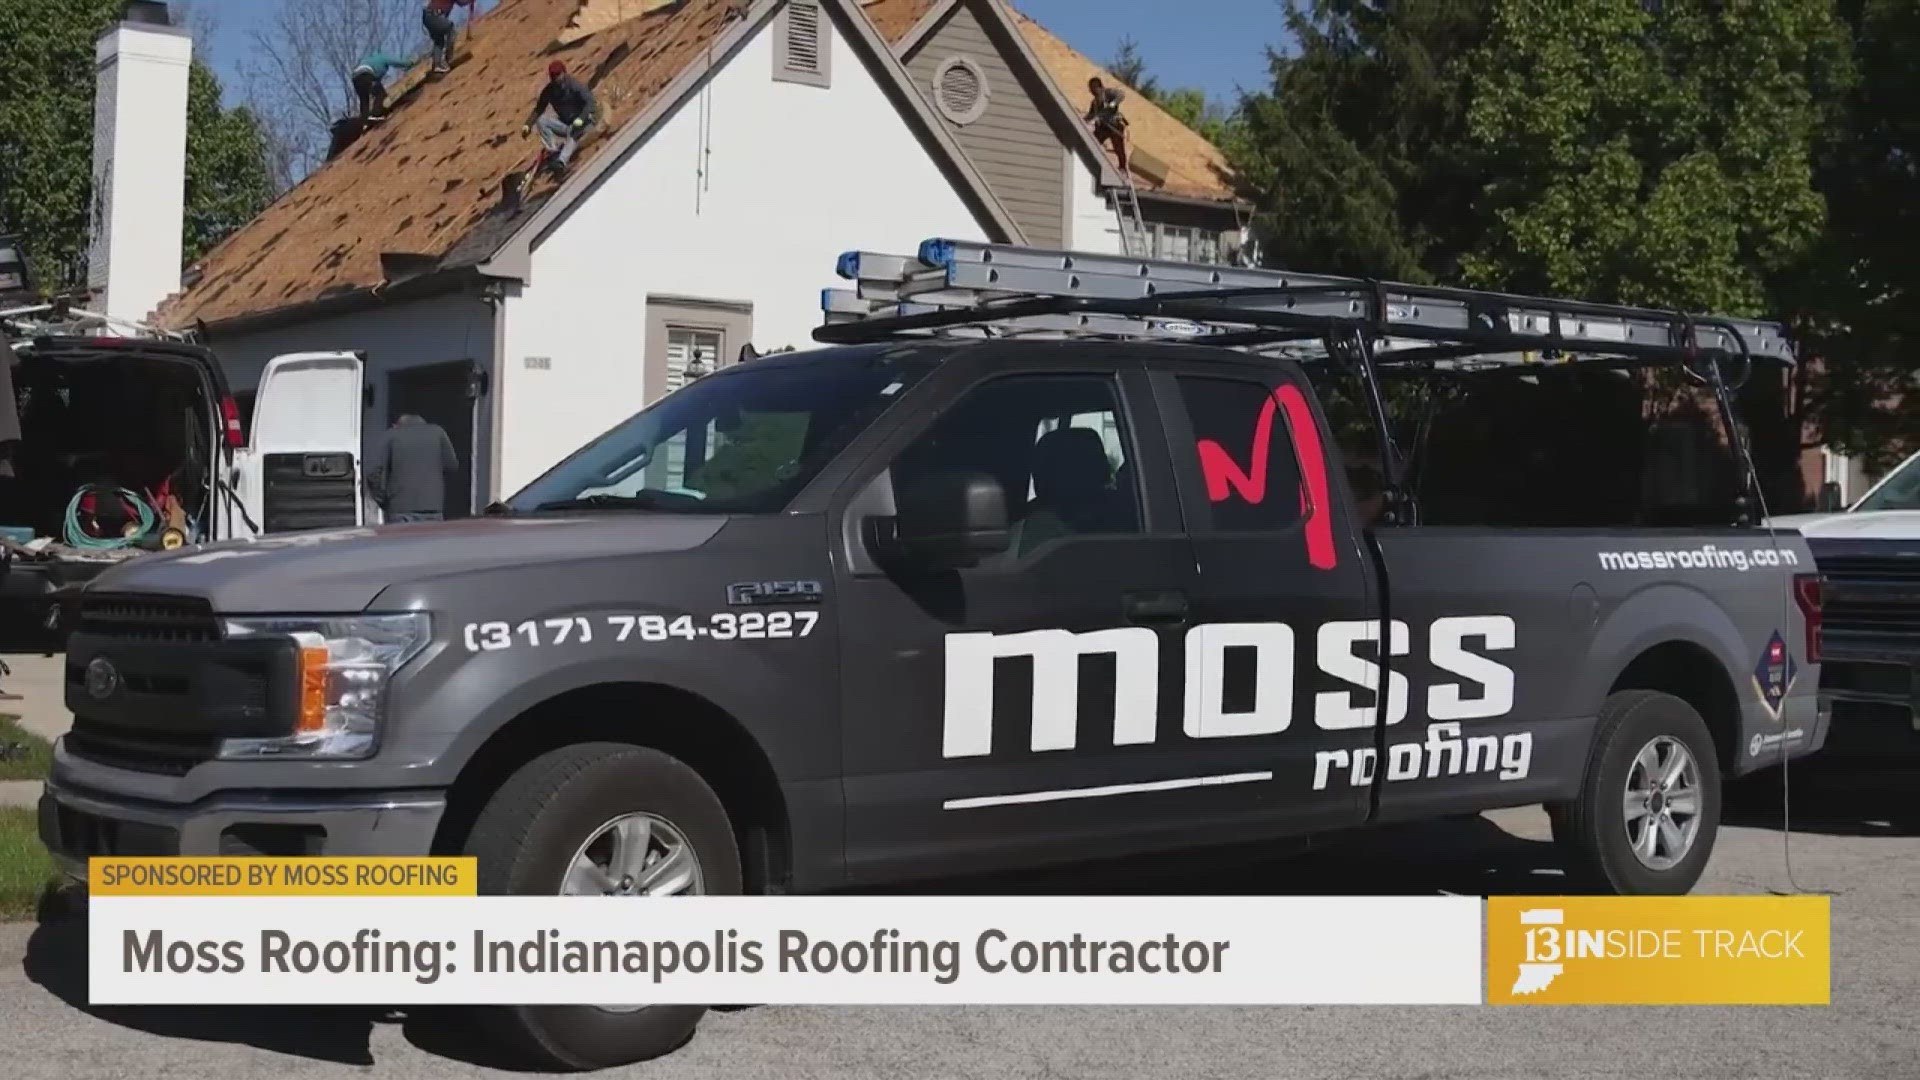 In this edition of 13 Inside Track, we are introducing you to Moss Roofing, the family-run business that has been serving Indianapolis since 1991.